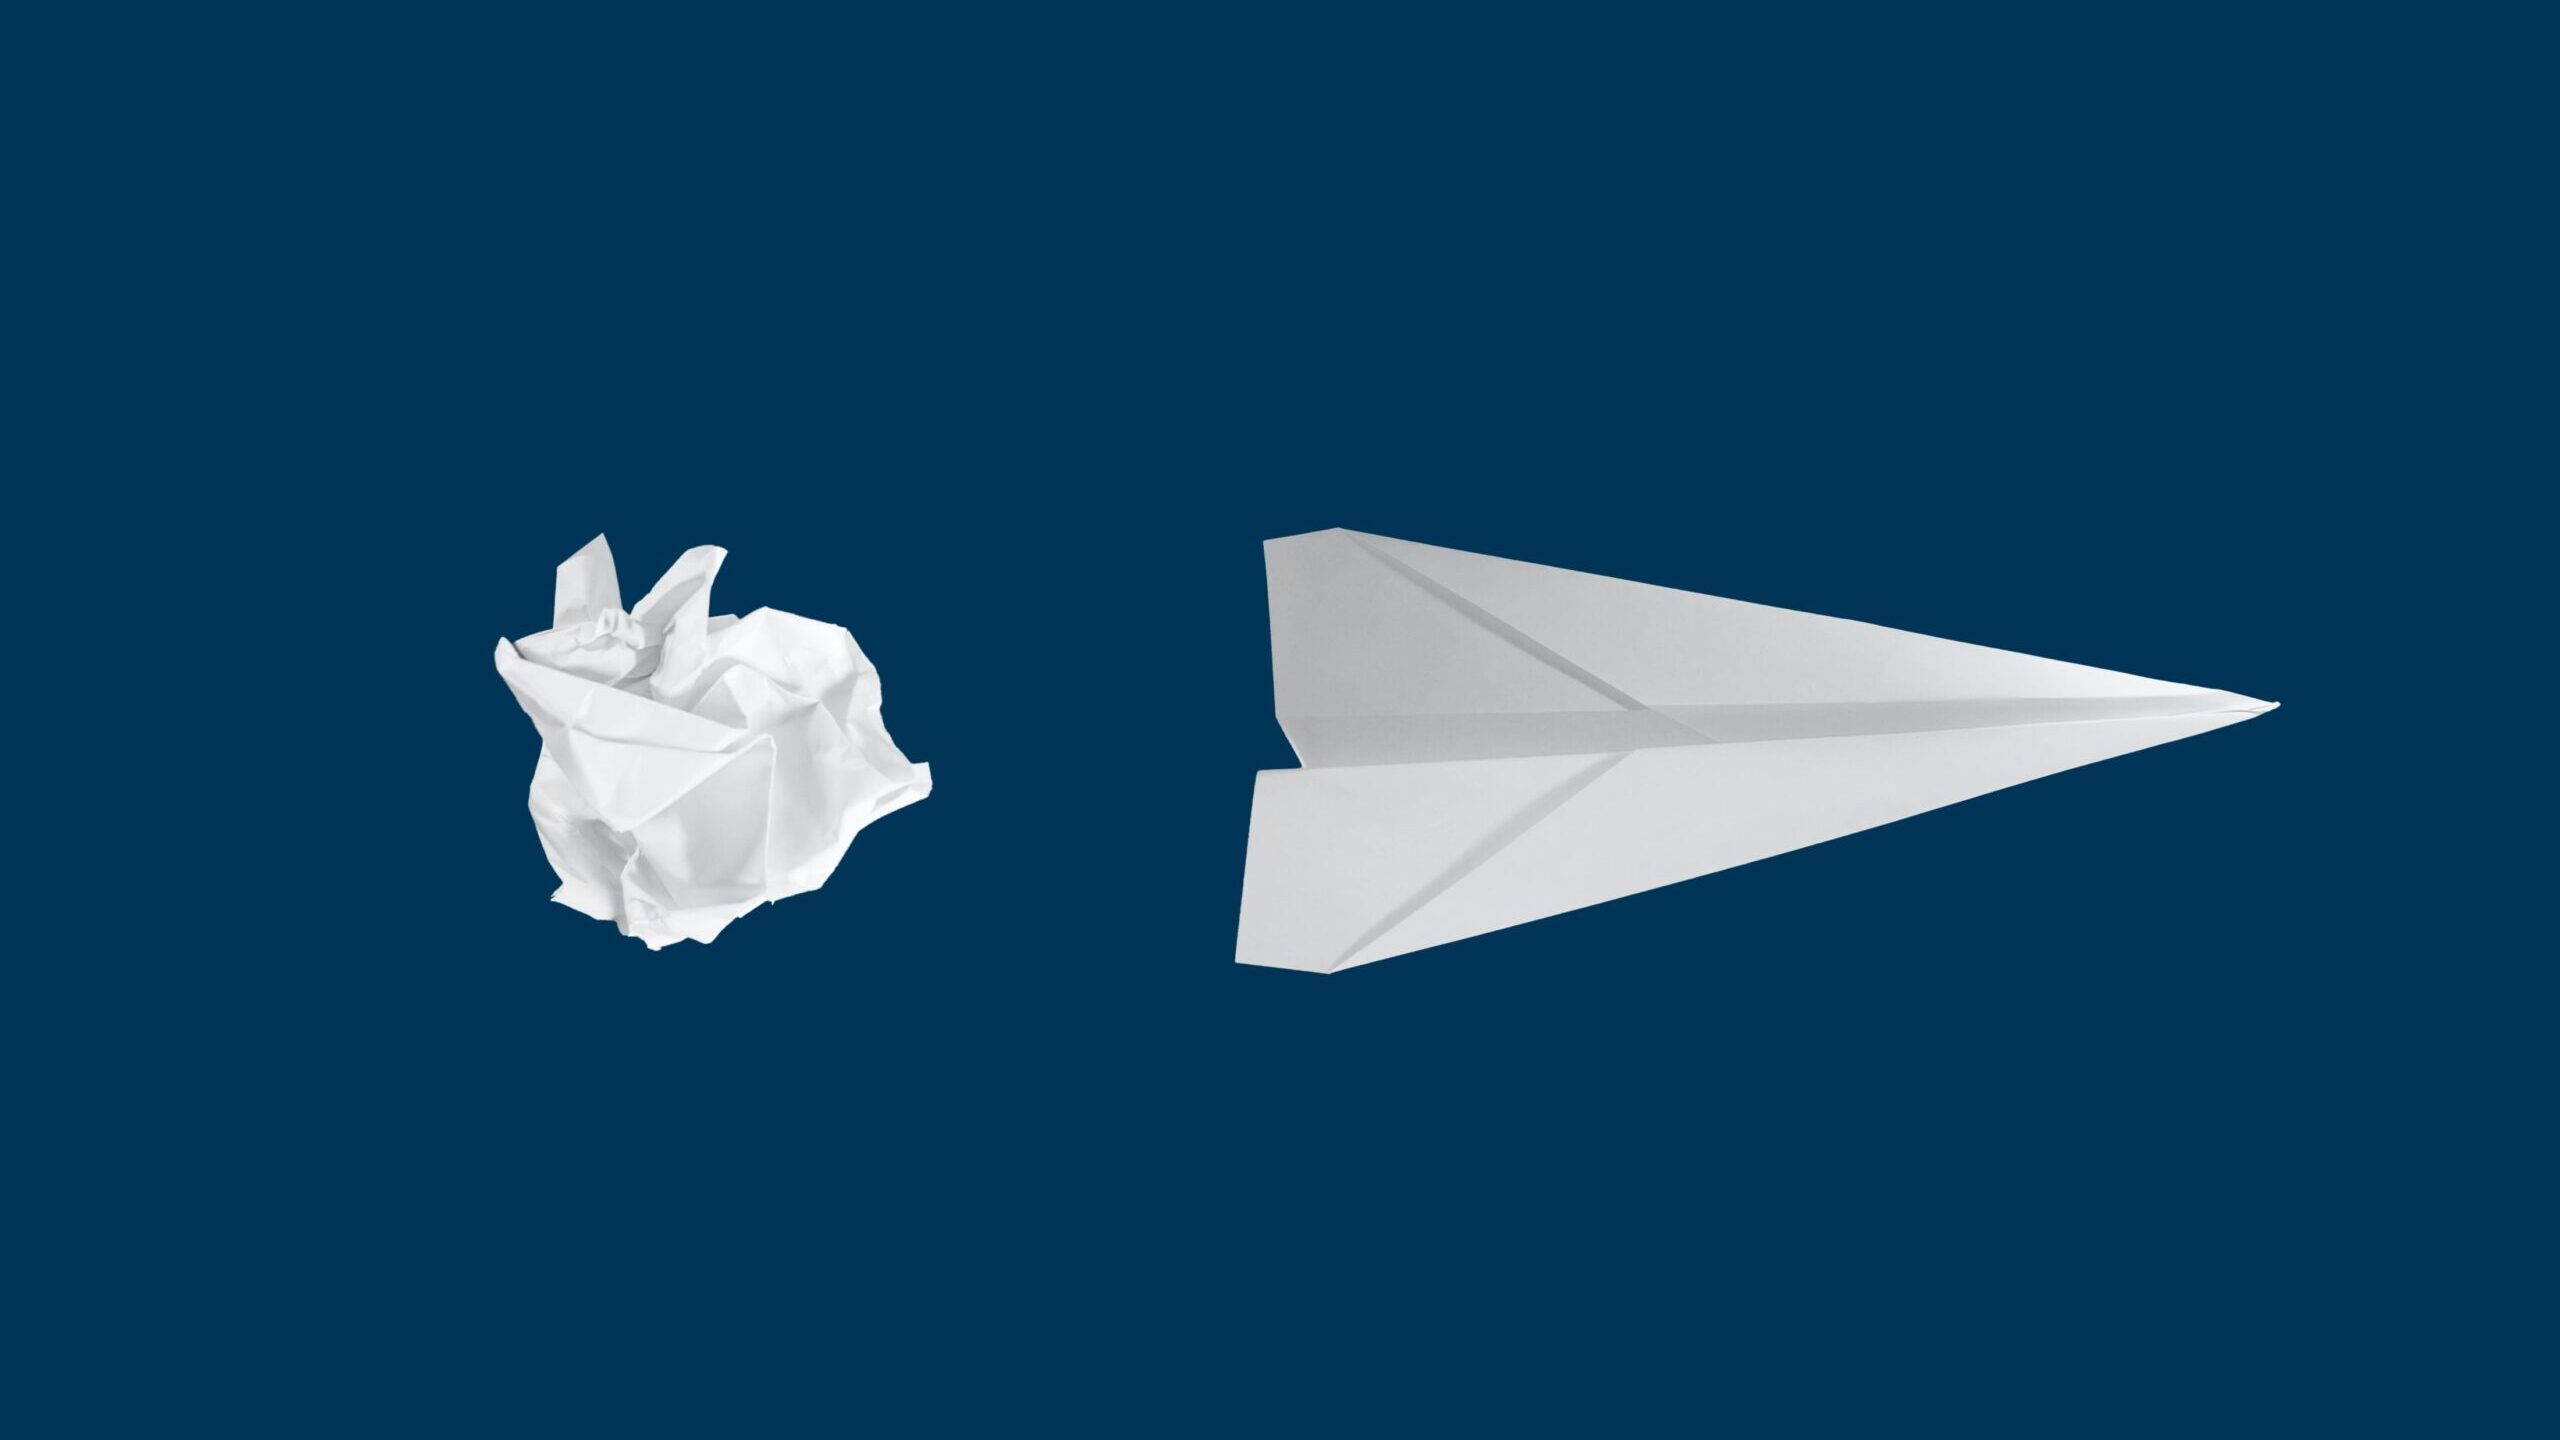 image of a paper airplane